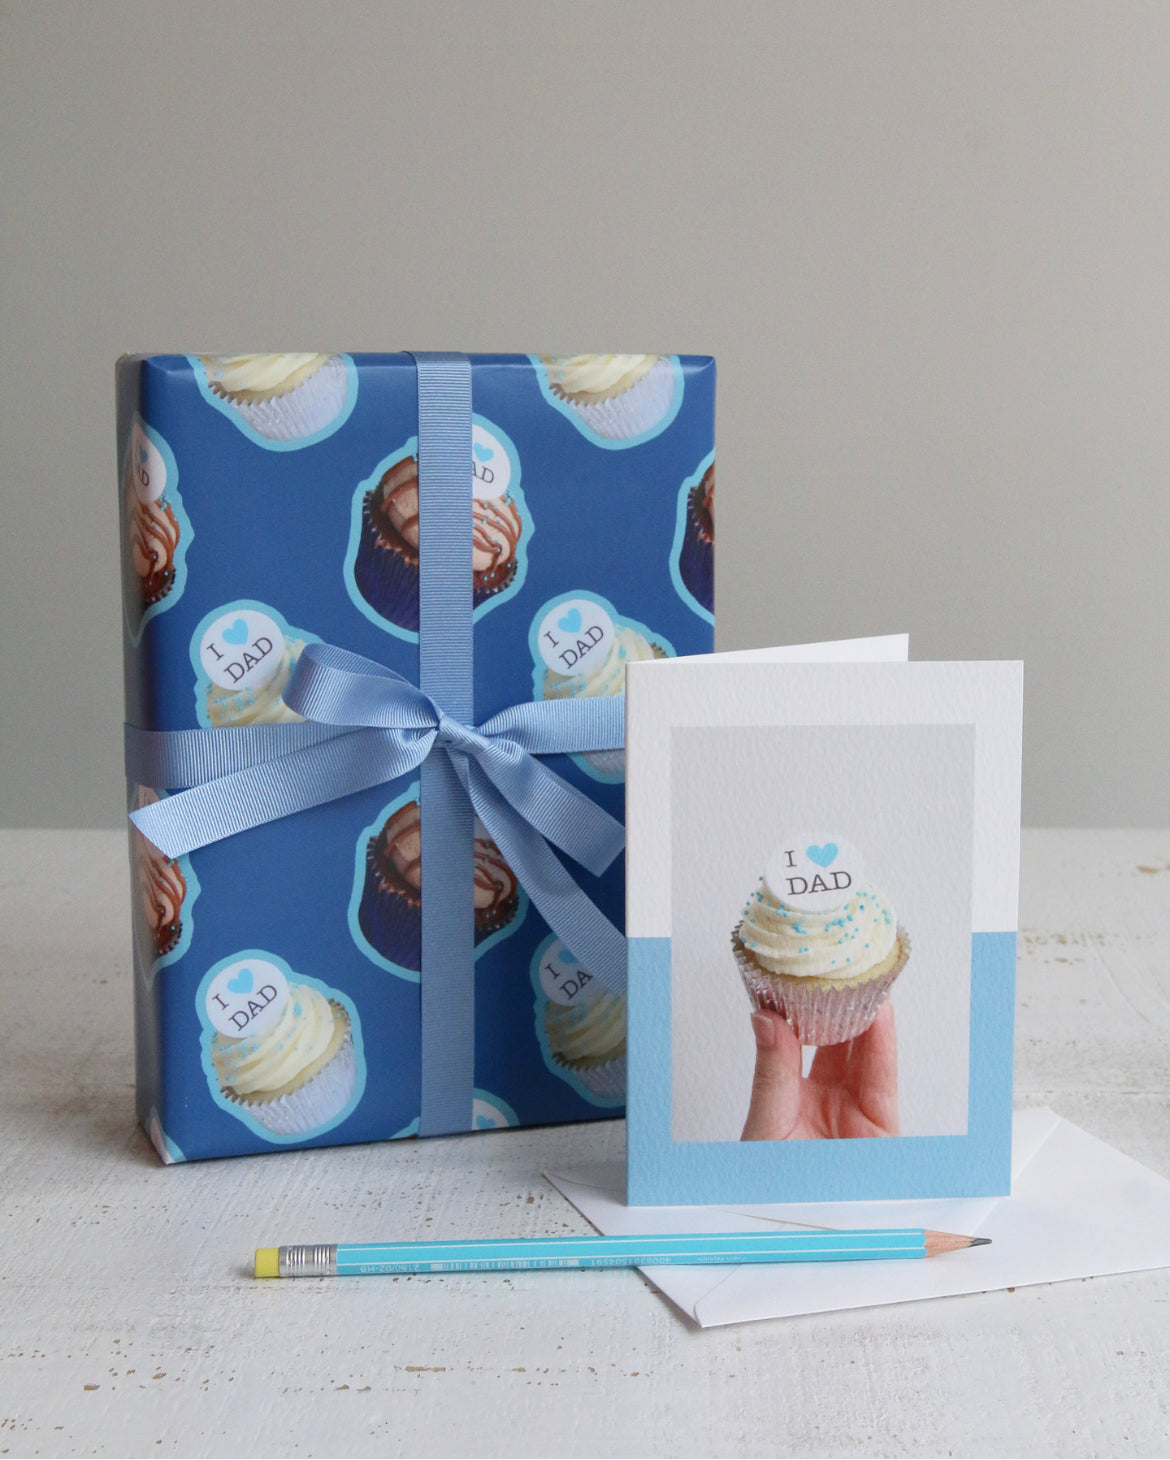 "I Heart Dad" Cupcake Card & Wrapping Paper